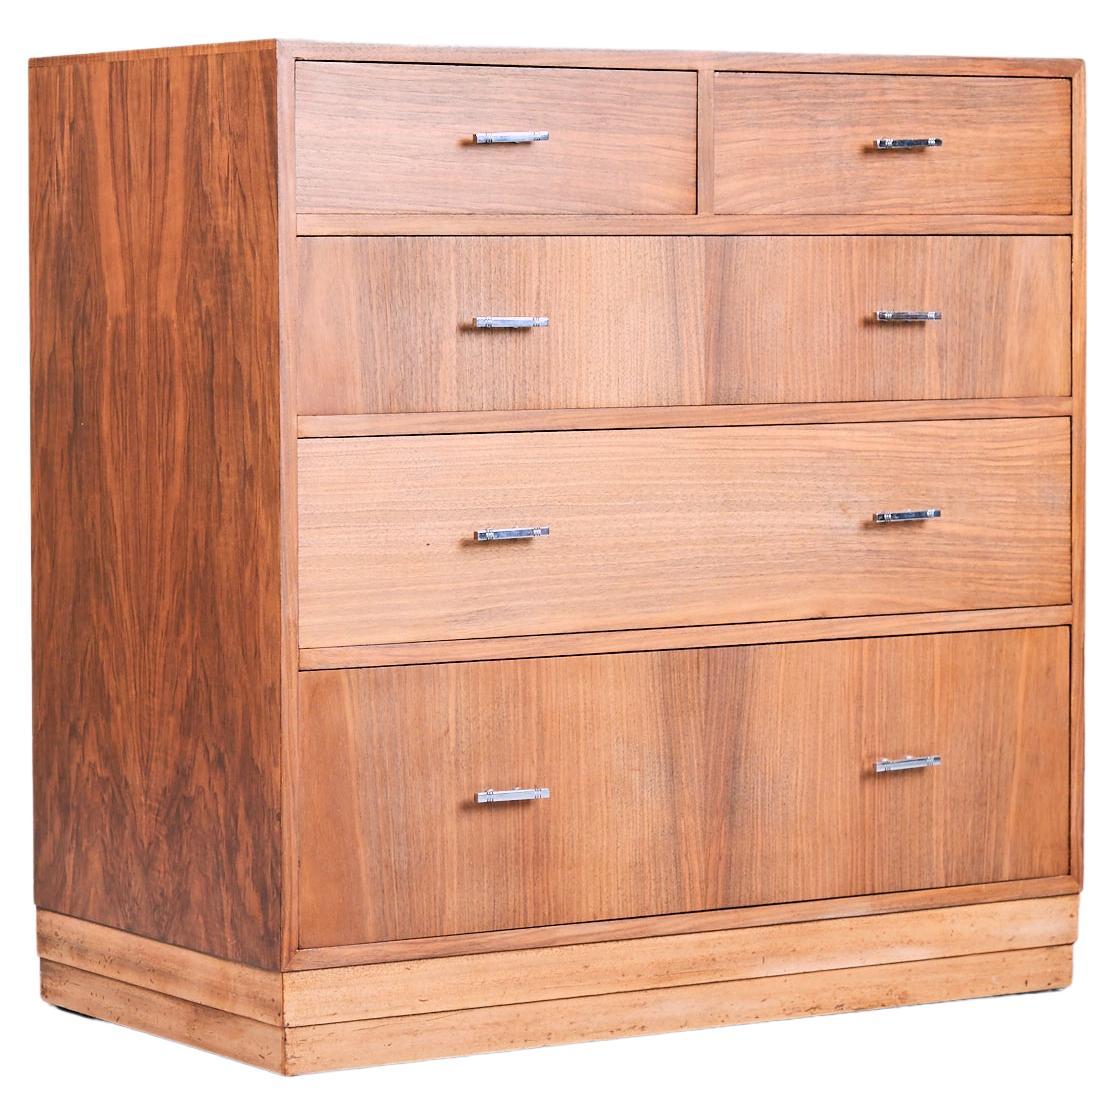 Art Deco Chest of Drawers, Hamptons of Pall Mall, London 1930s For Sale